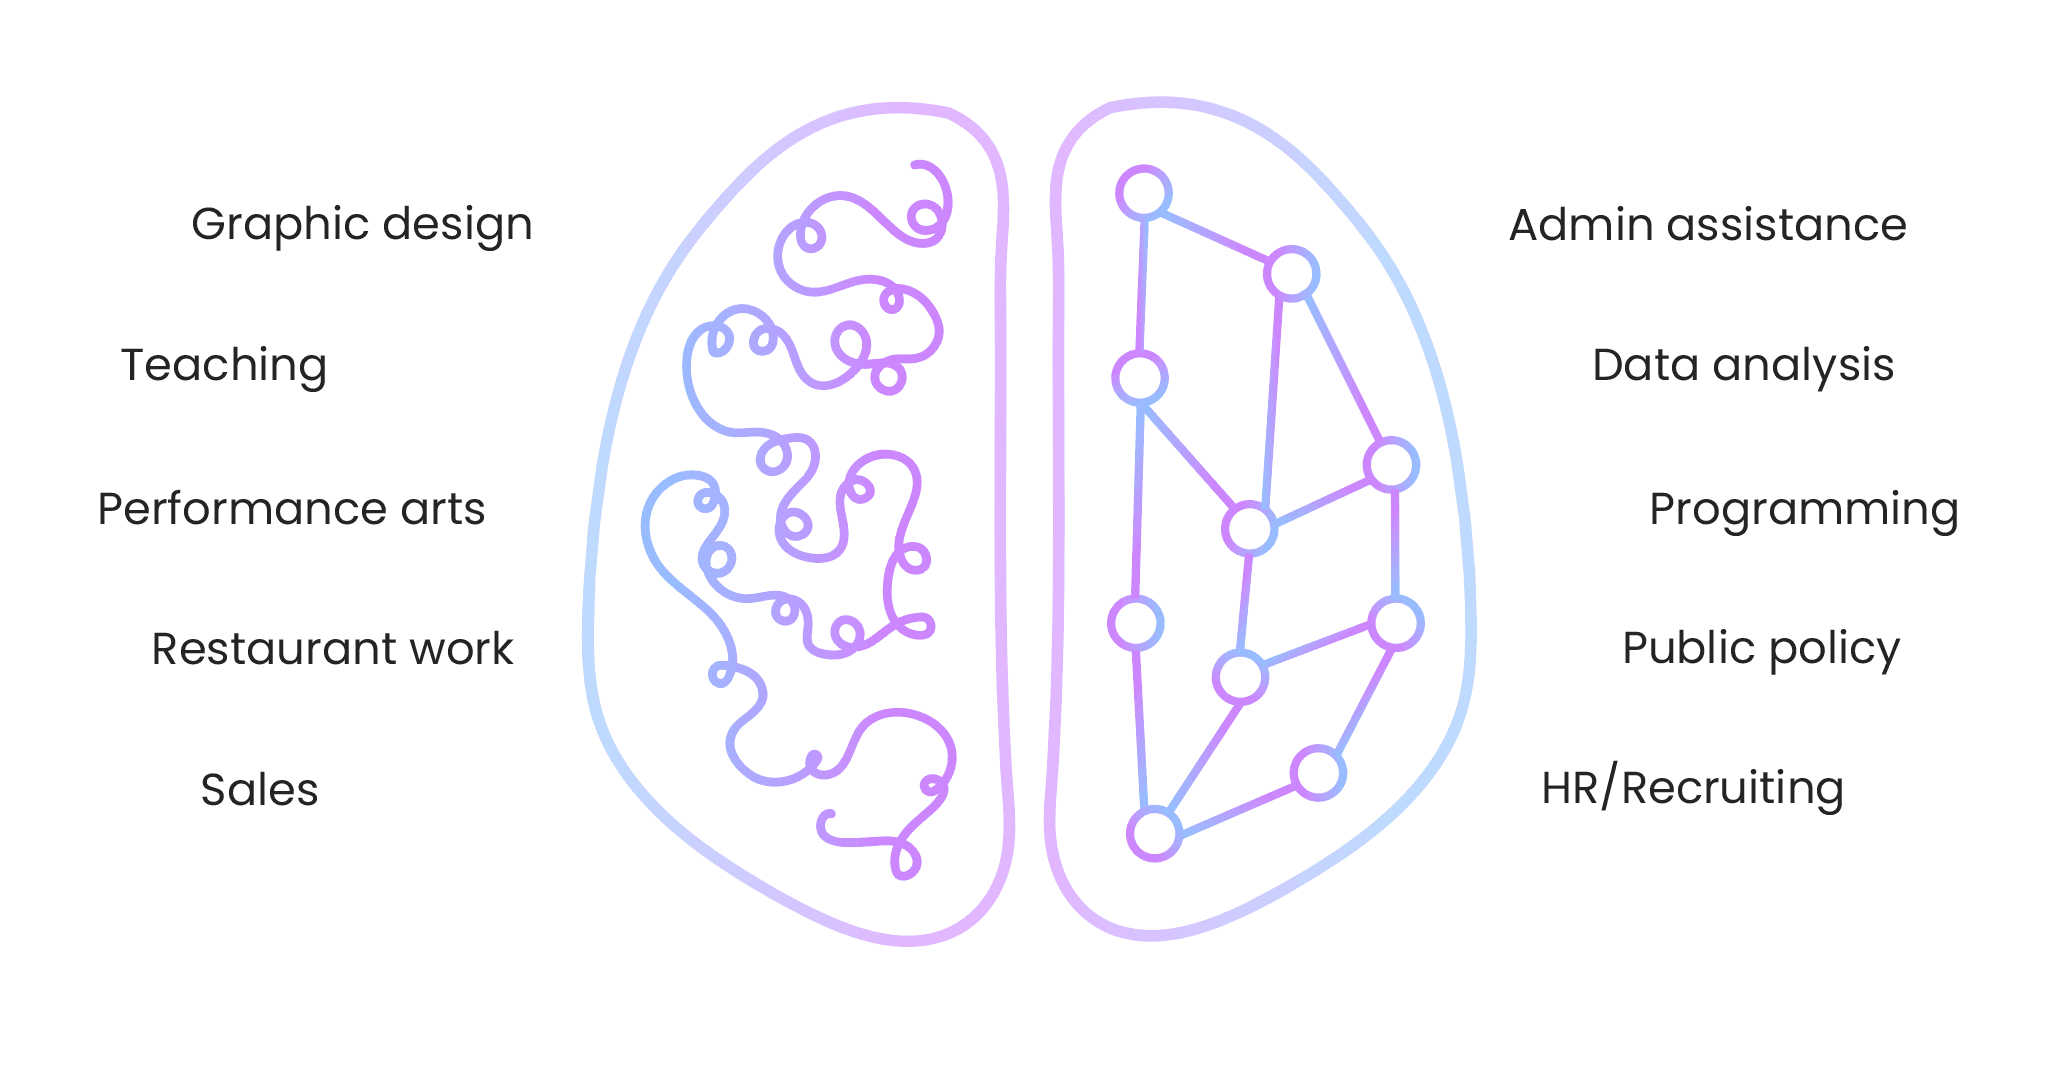 Illustration of a neurodiverse brain, featuring skills like Graphic Design, Teaching, Performance Arts, Restaurant Work, Sales, Admin Assistance, Data Analysis, Programming, Public Policy, HR/Recruiting